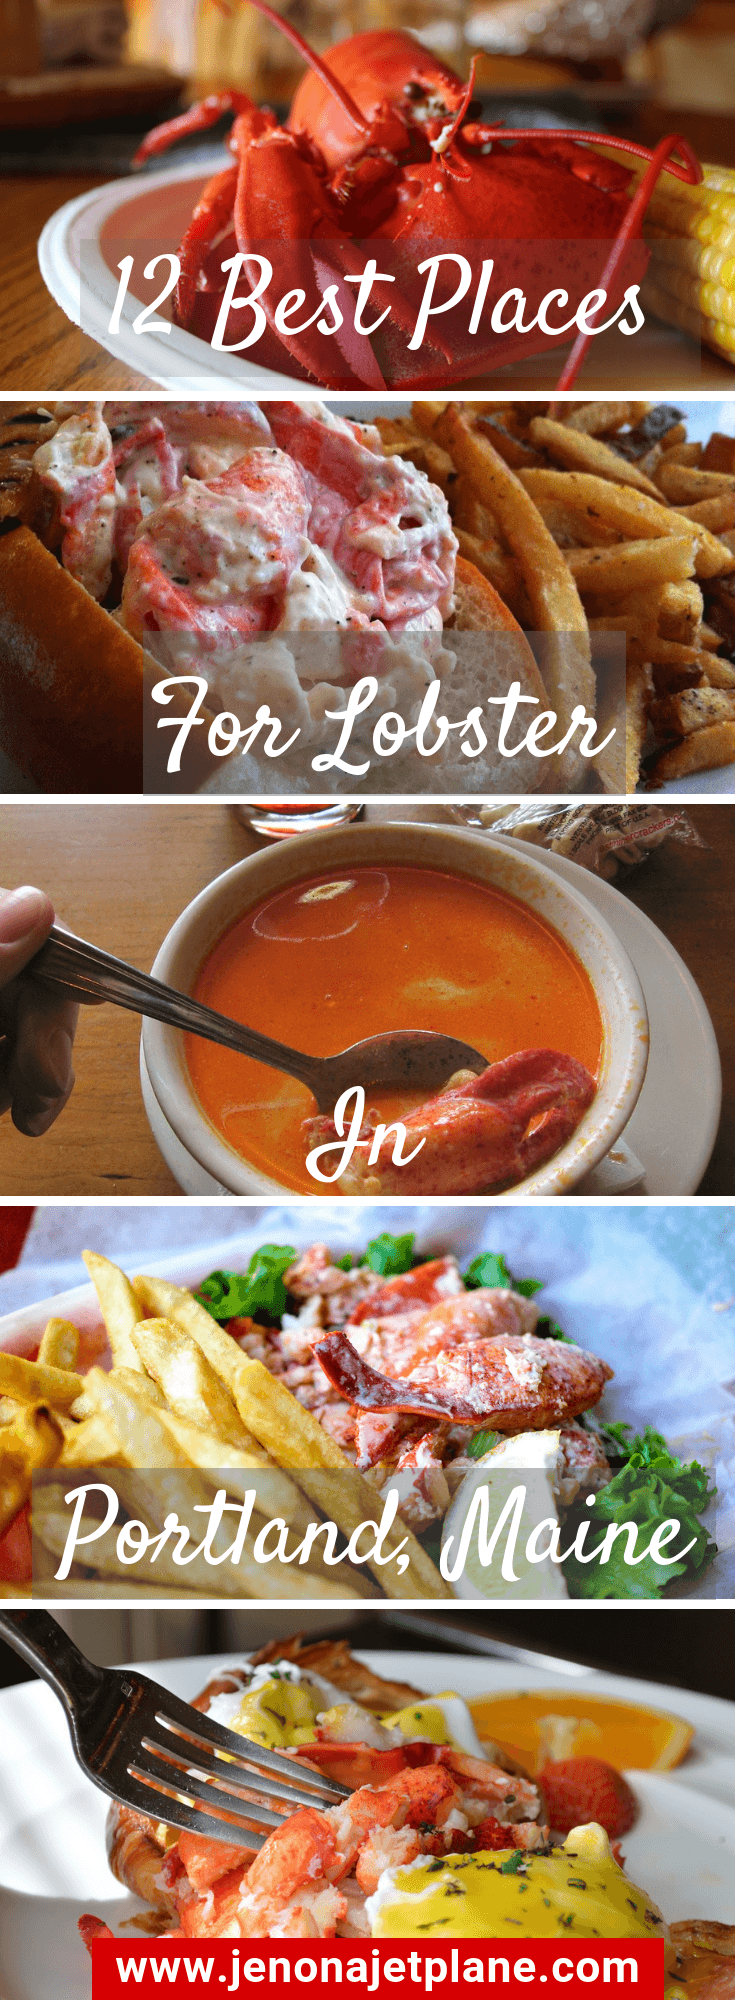 Travel Bloggers Weigh In: Where to Find the Best Lobster in Portland